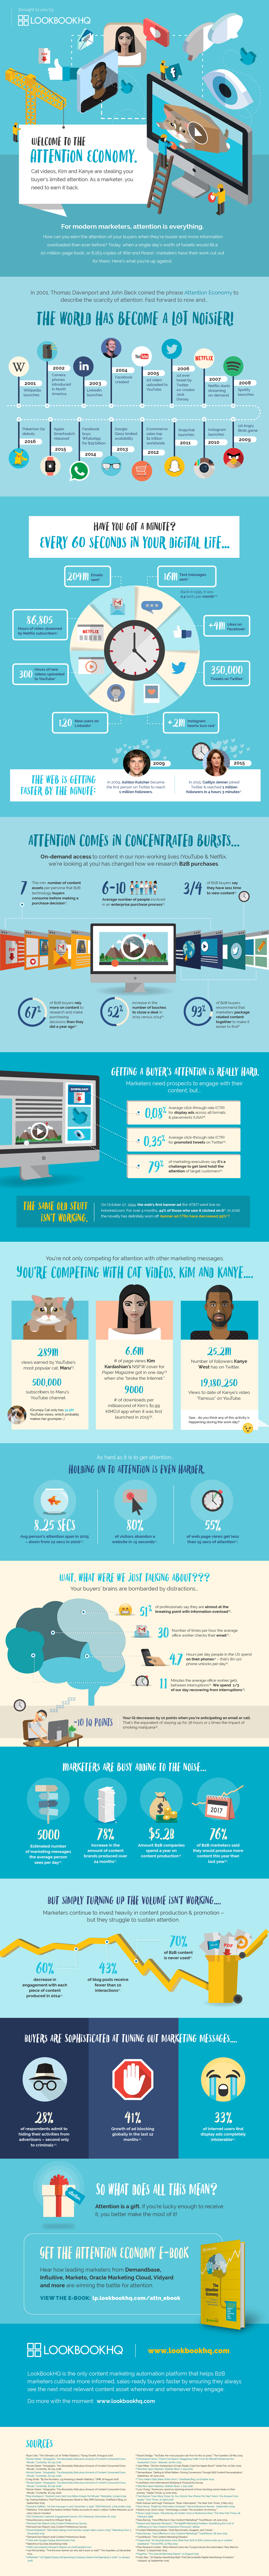 The Attention Economy: The Impact of Attention Scarcity on Modern Marketing - #Infographic